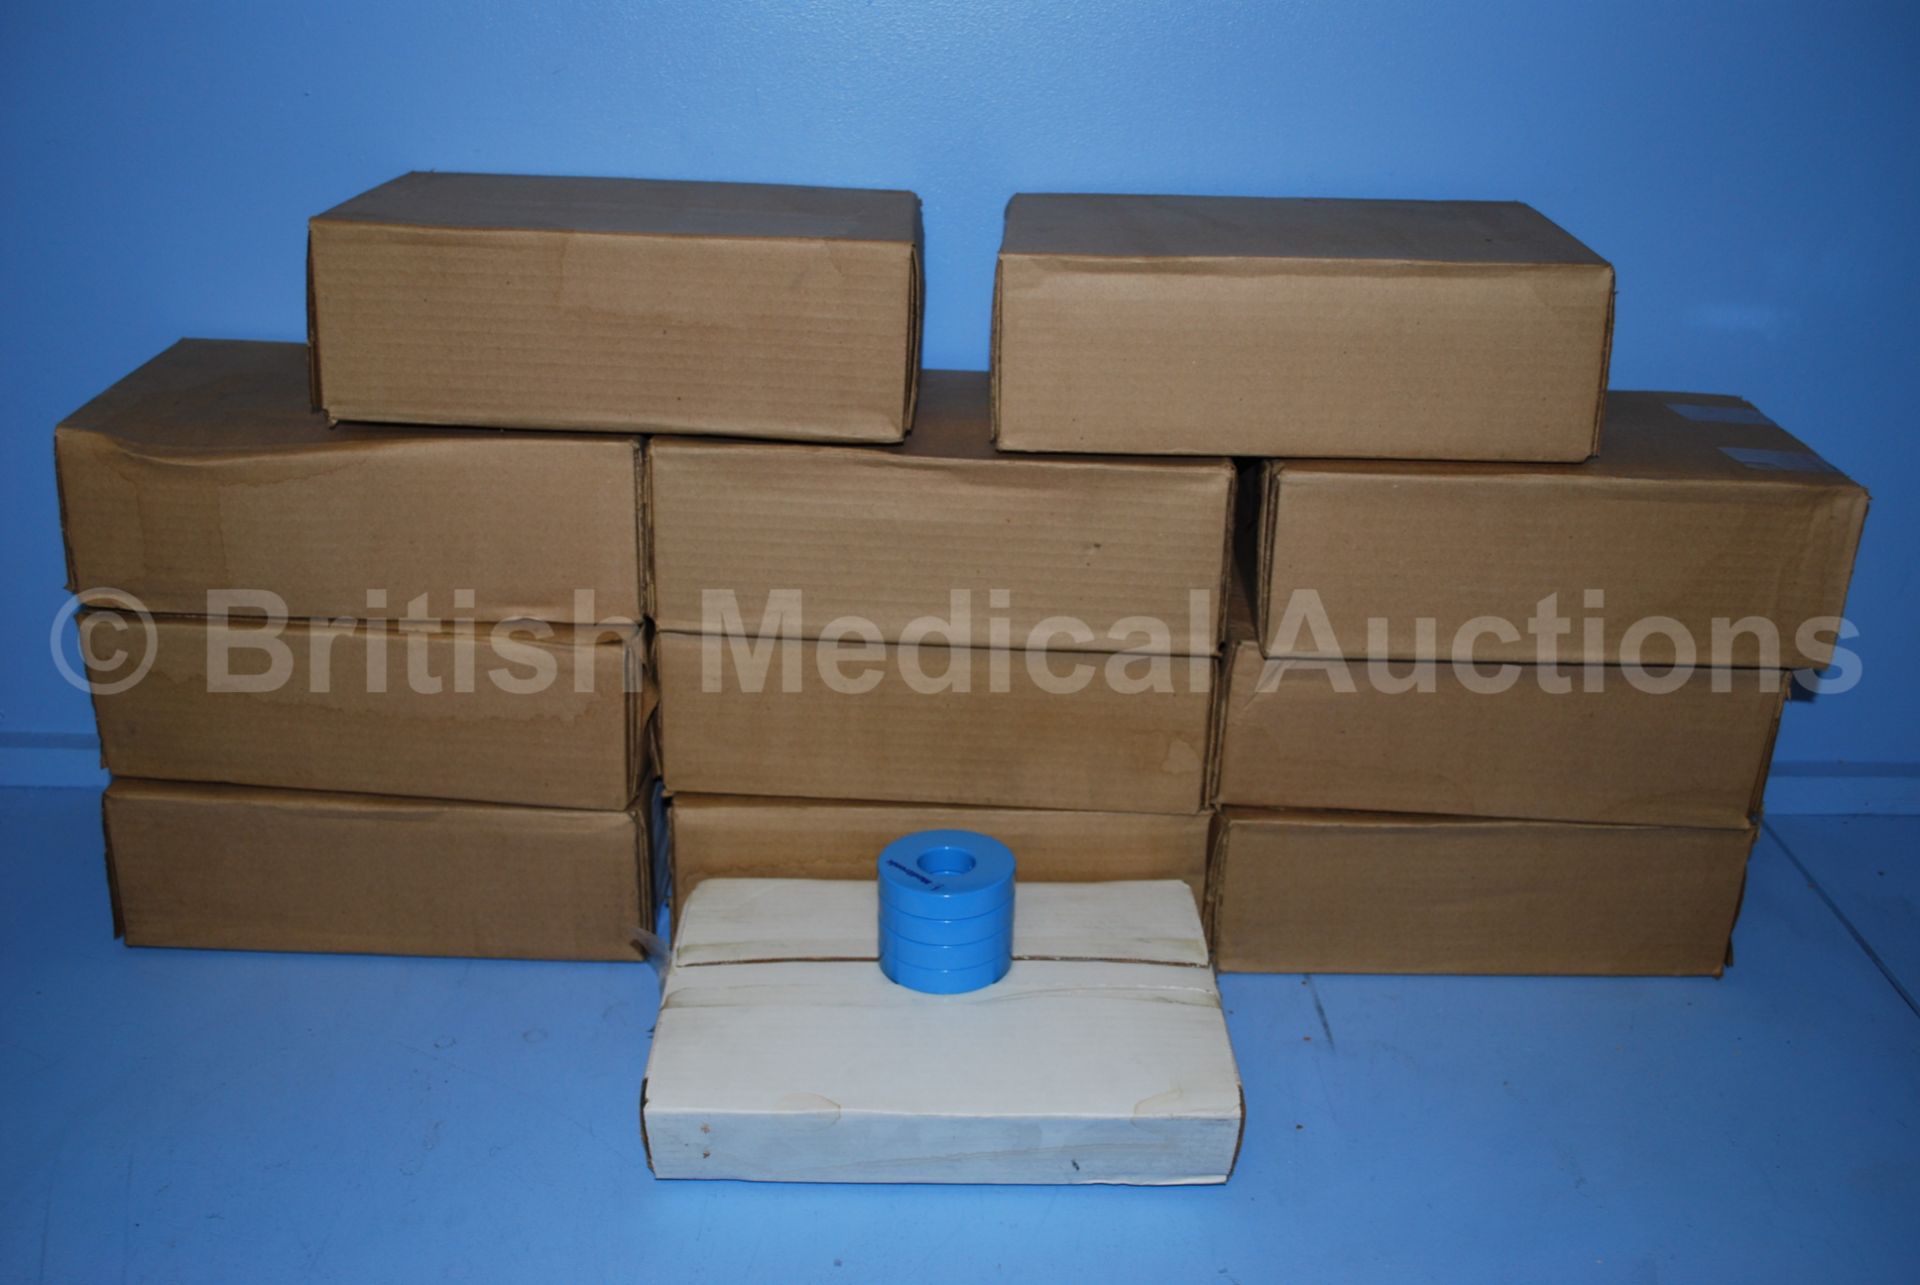 12 x Boxes of 4 Medtronic Patient Magnets (Brand N